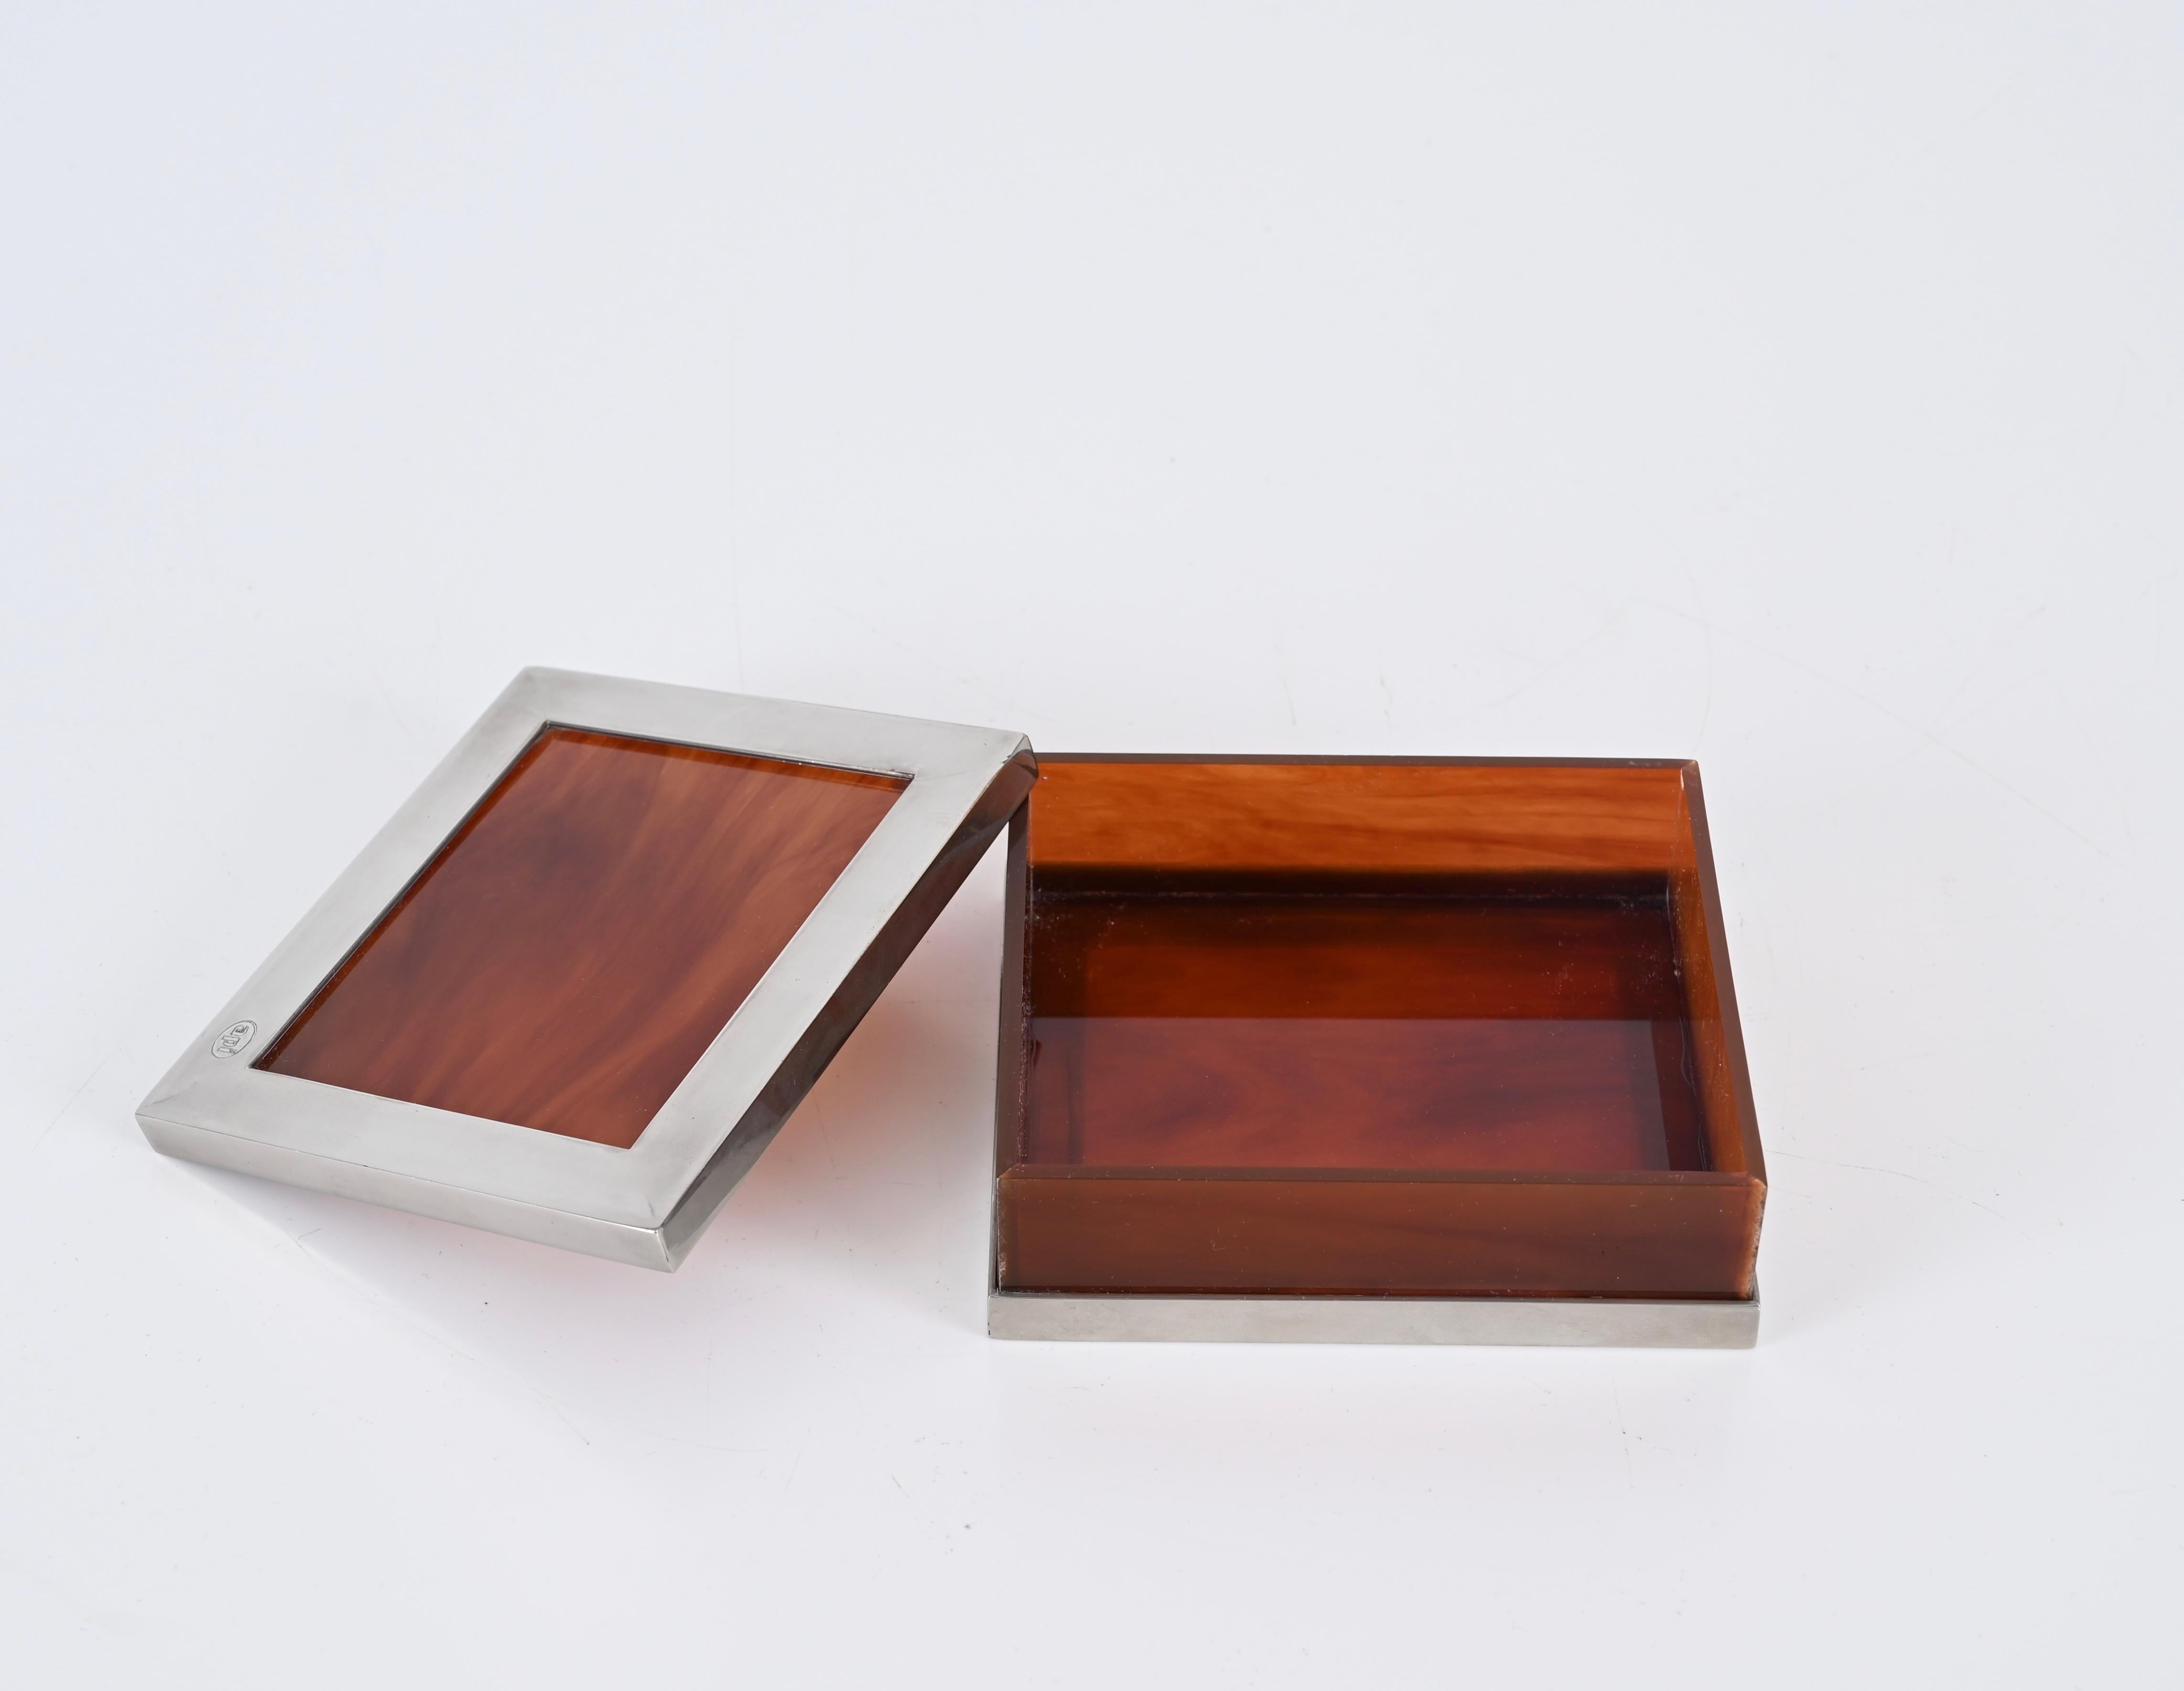 Mid-Century Modern Dior Style Jewel Box in Tortoiseshell Lucite and Chrome, API Italy, 1970s For Sale